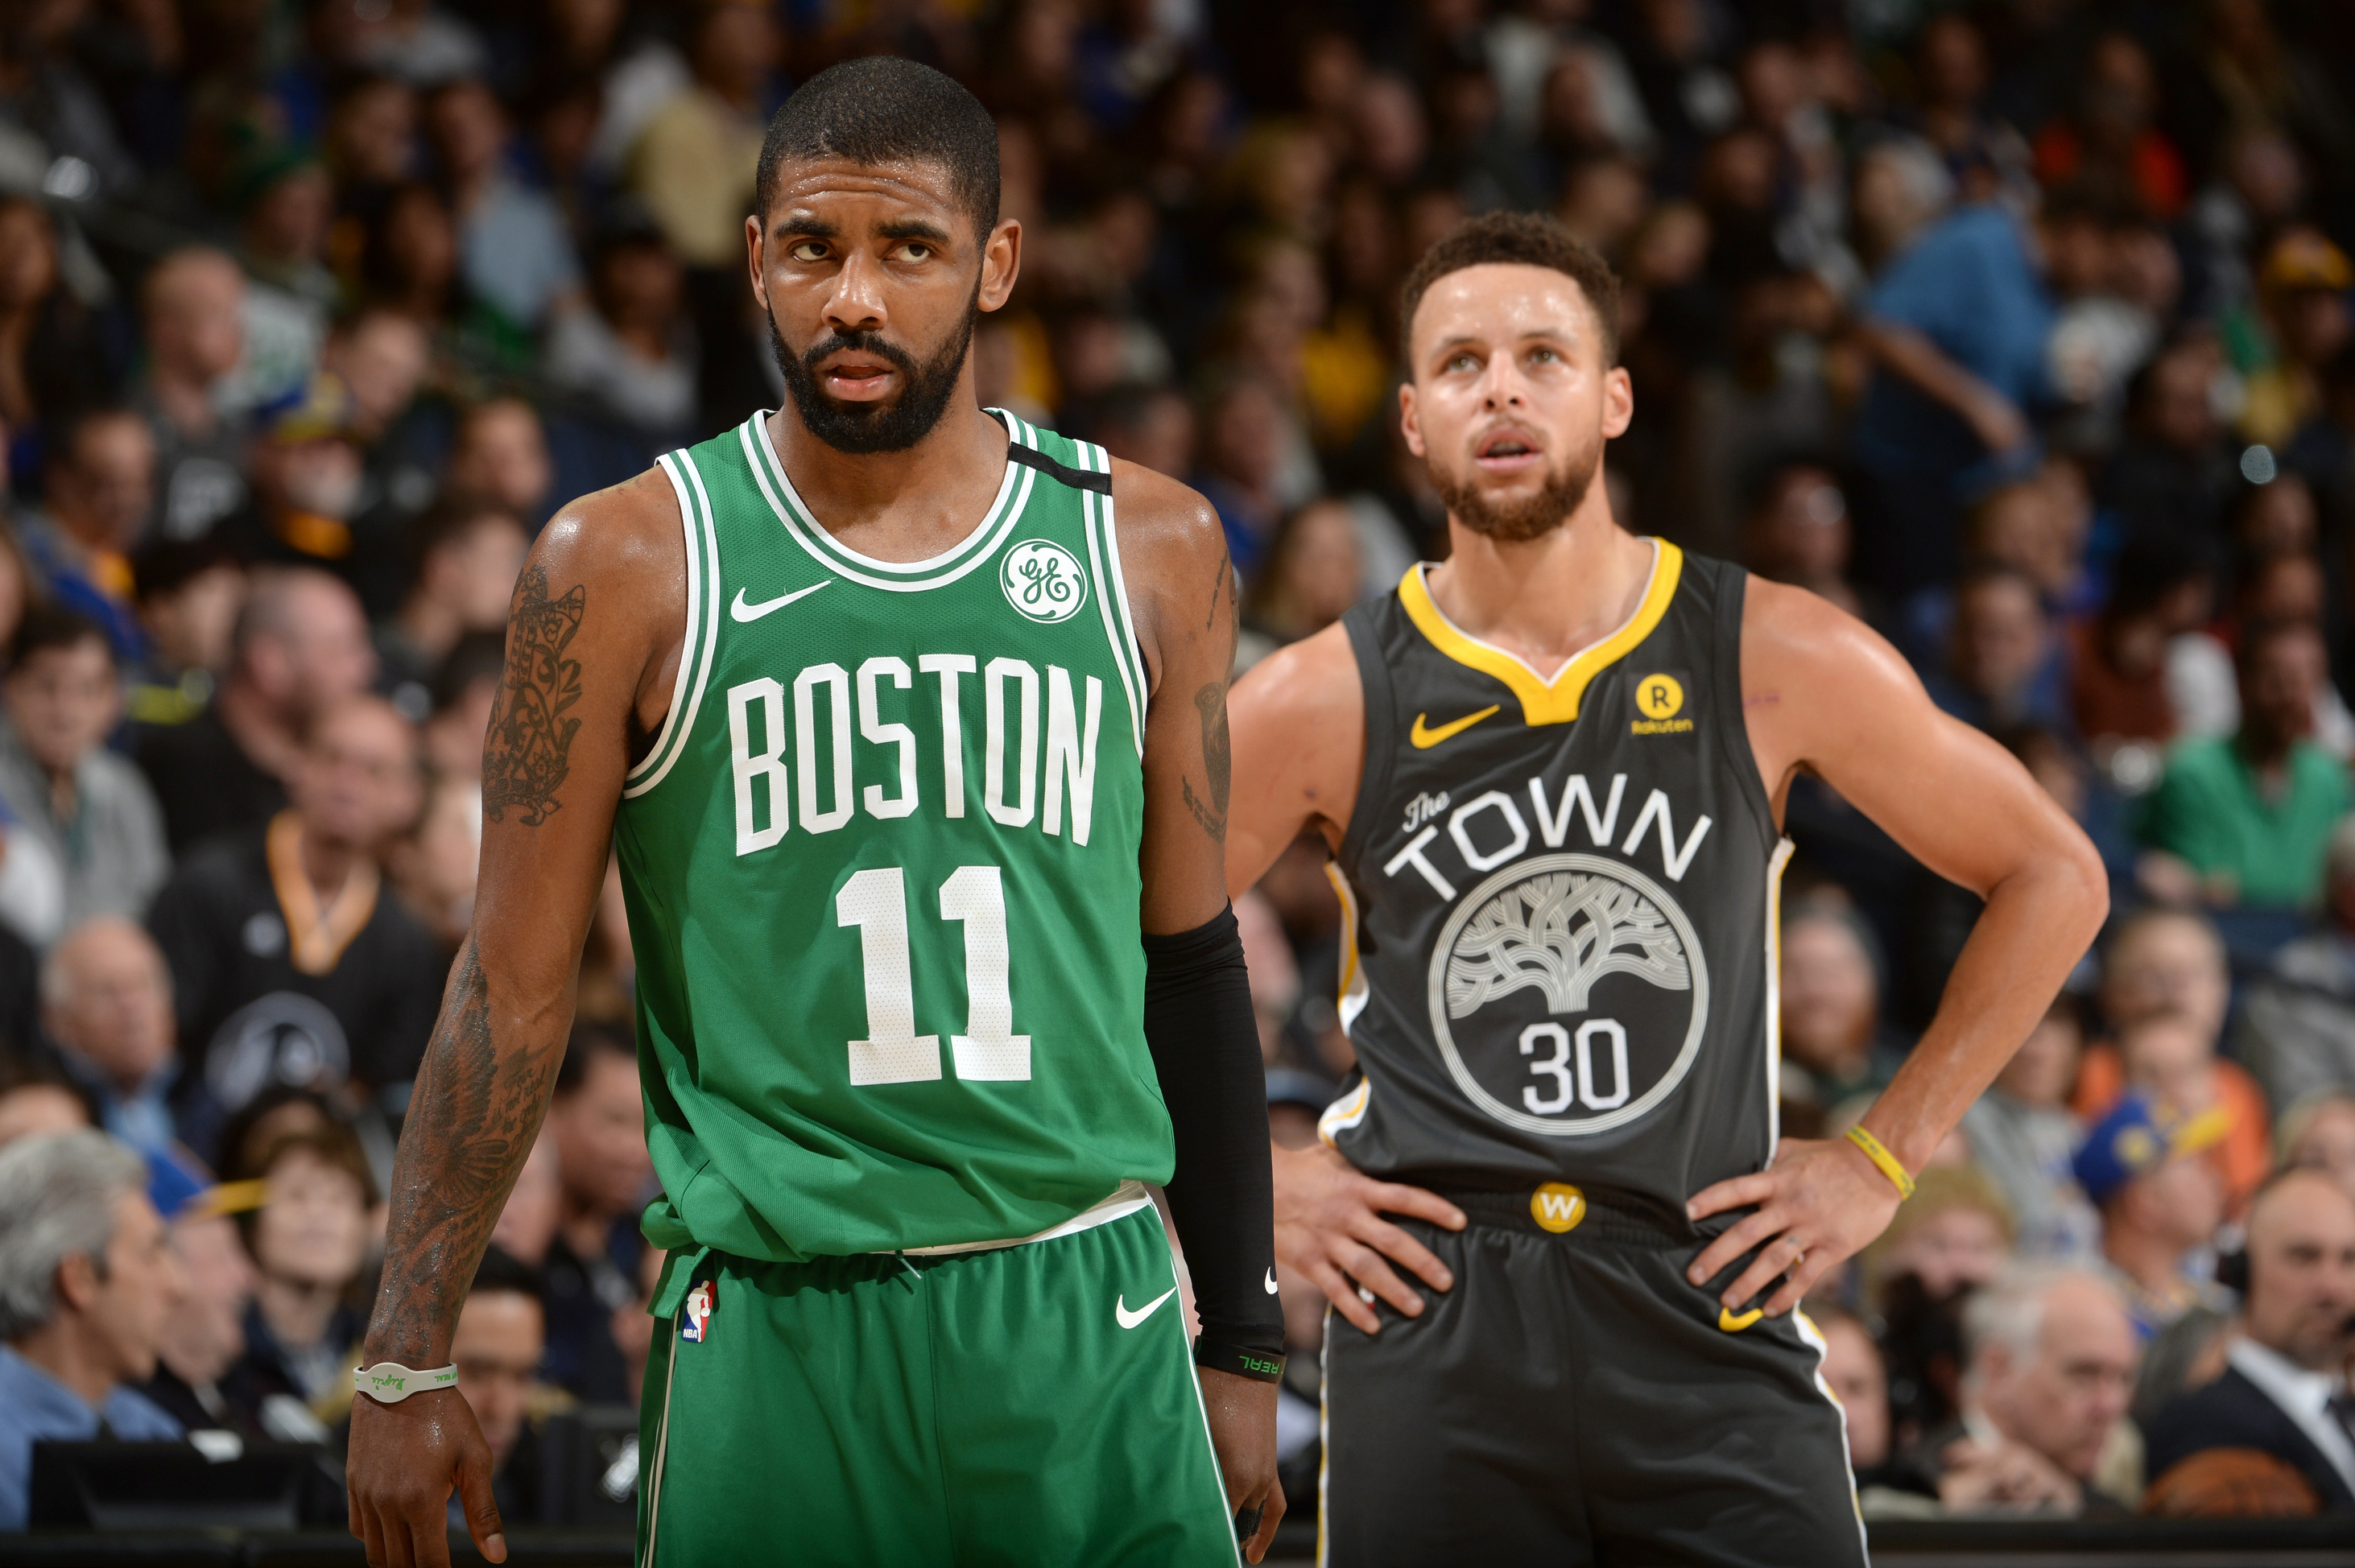 Steph Kyrie Rivalry Heats Up, But Curry Remains Top Chef Until Proven Otherwise. Bleacher Report. Latest News, Videos And Highlights